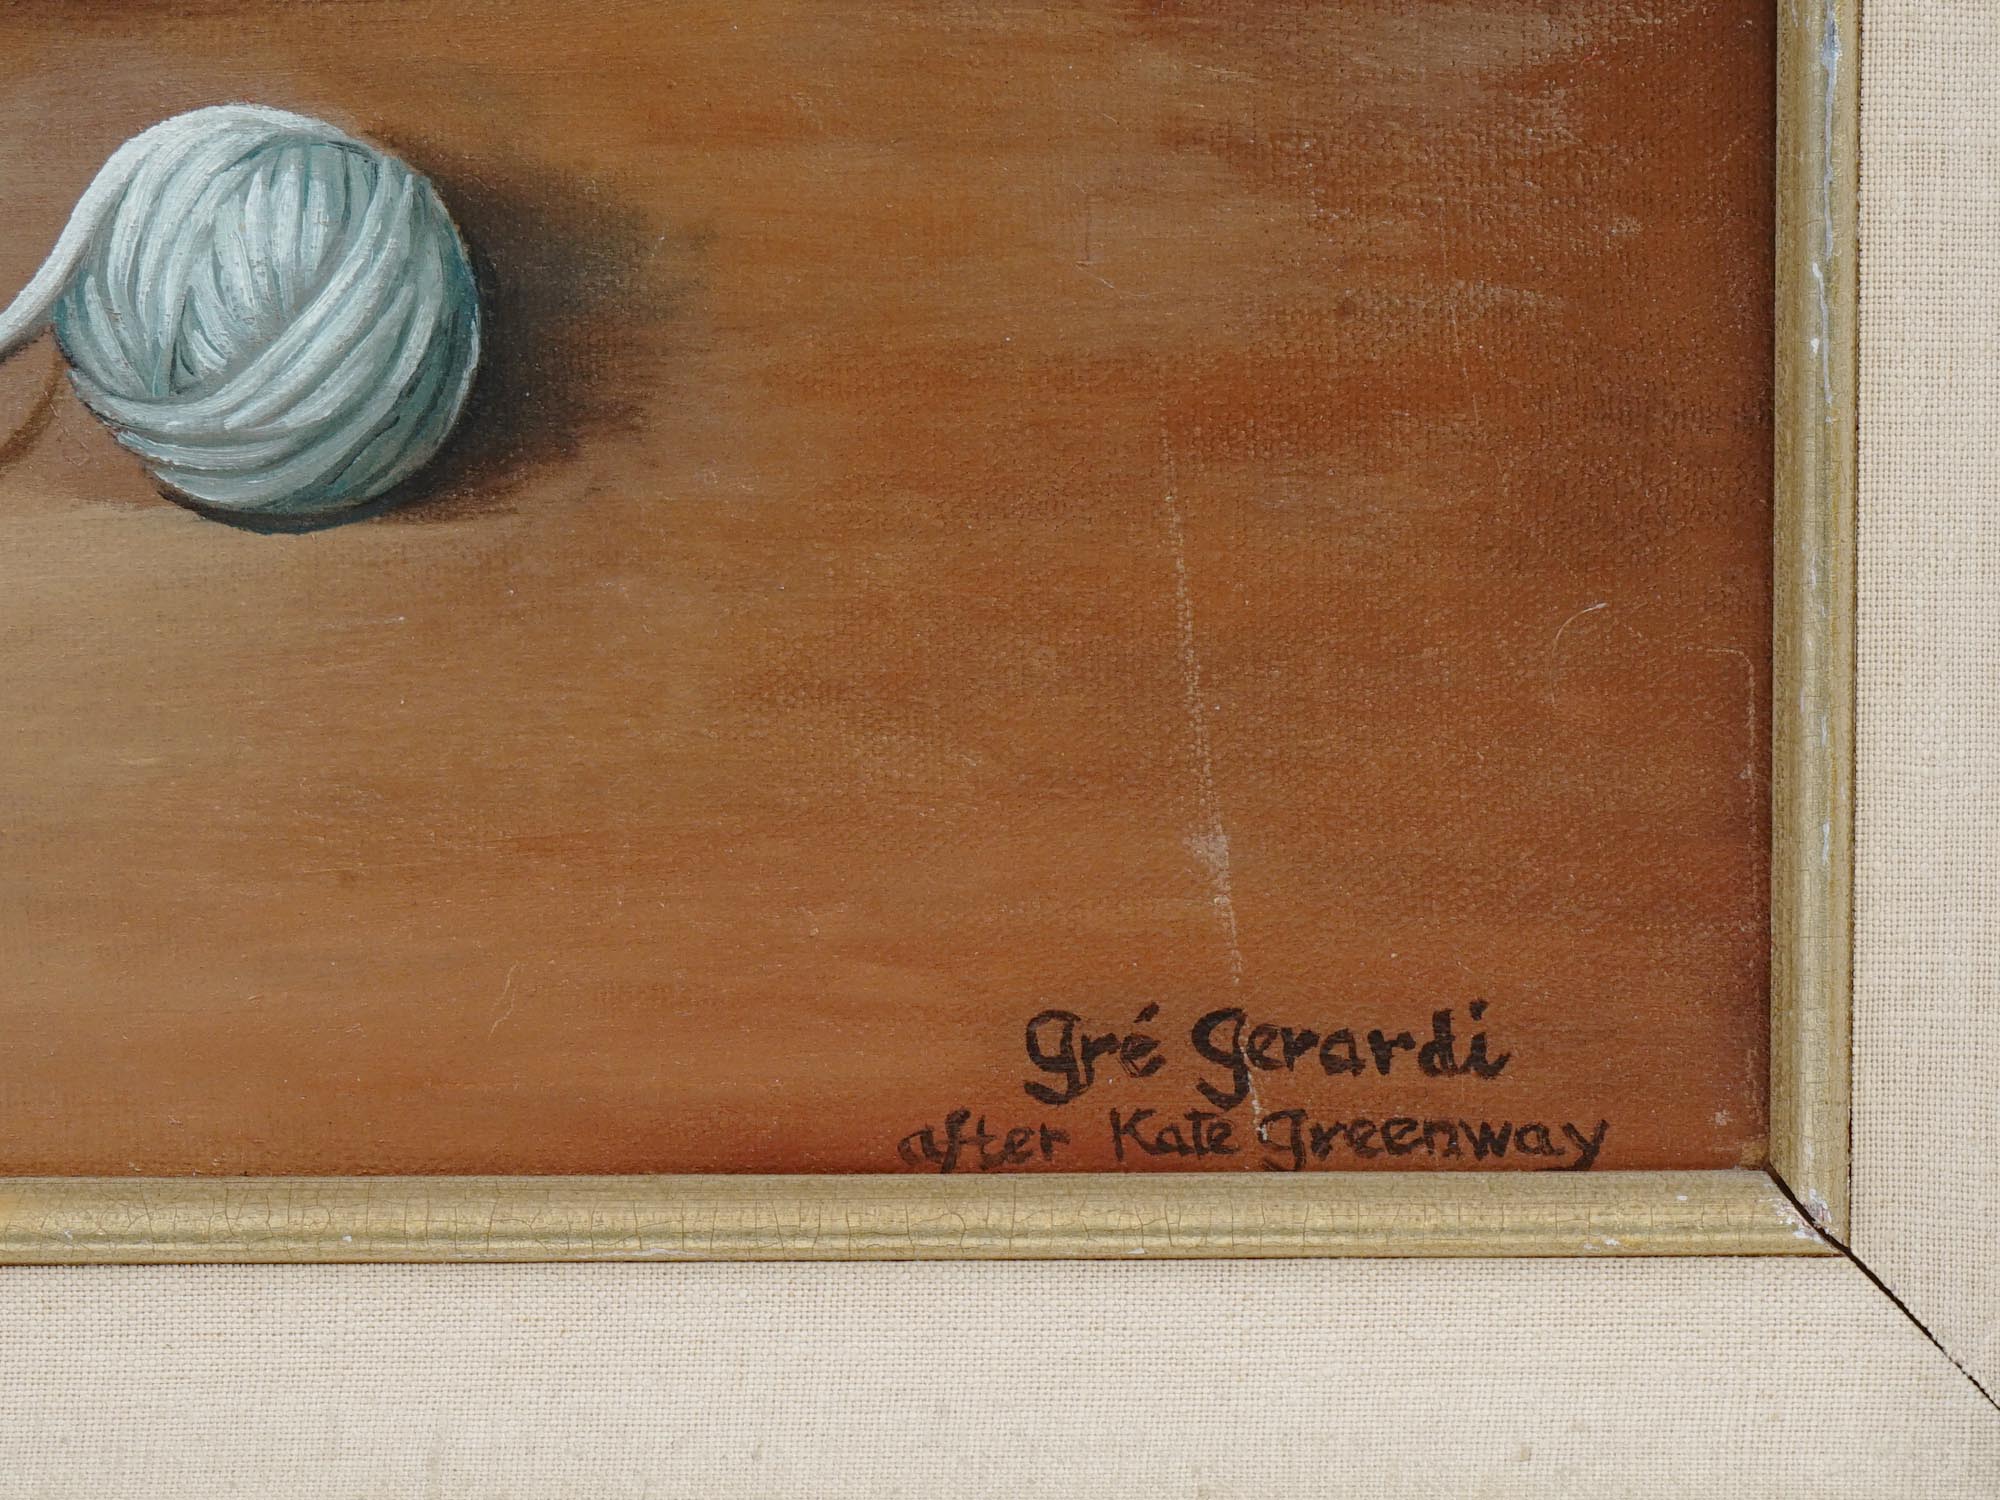 OIL PAINTING BY GRE GERARDI AFTER KATE GREENAWAY PIC-4